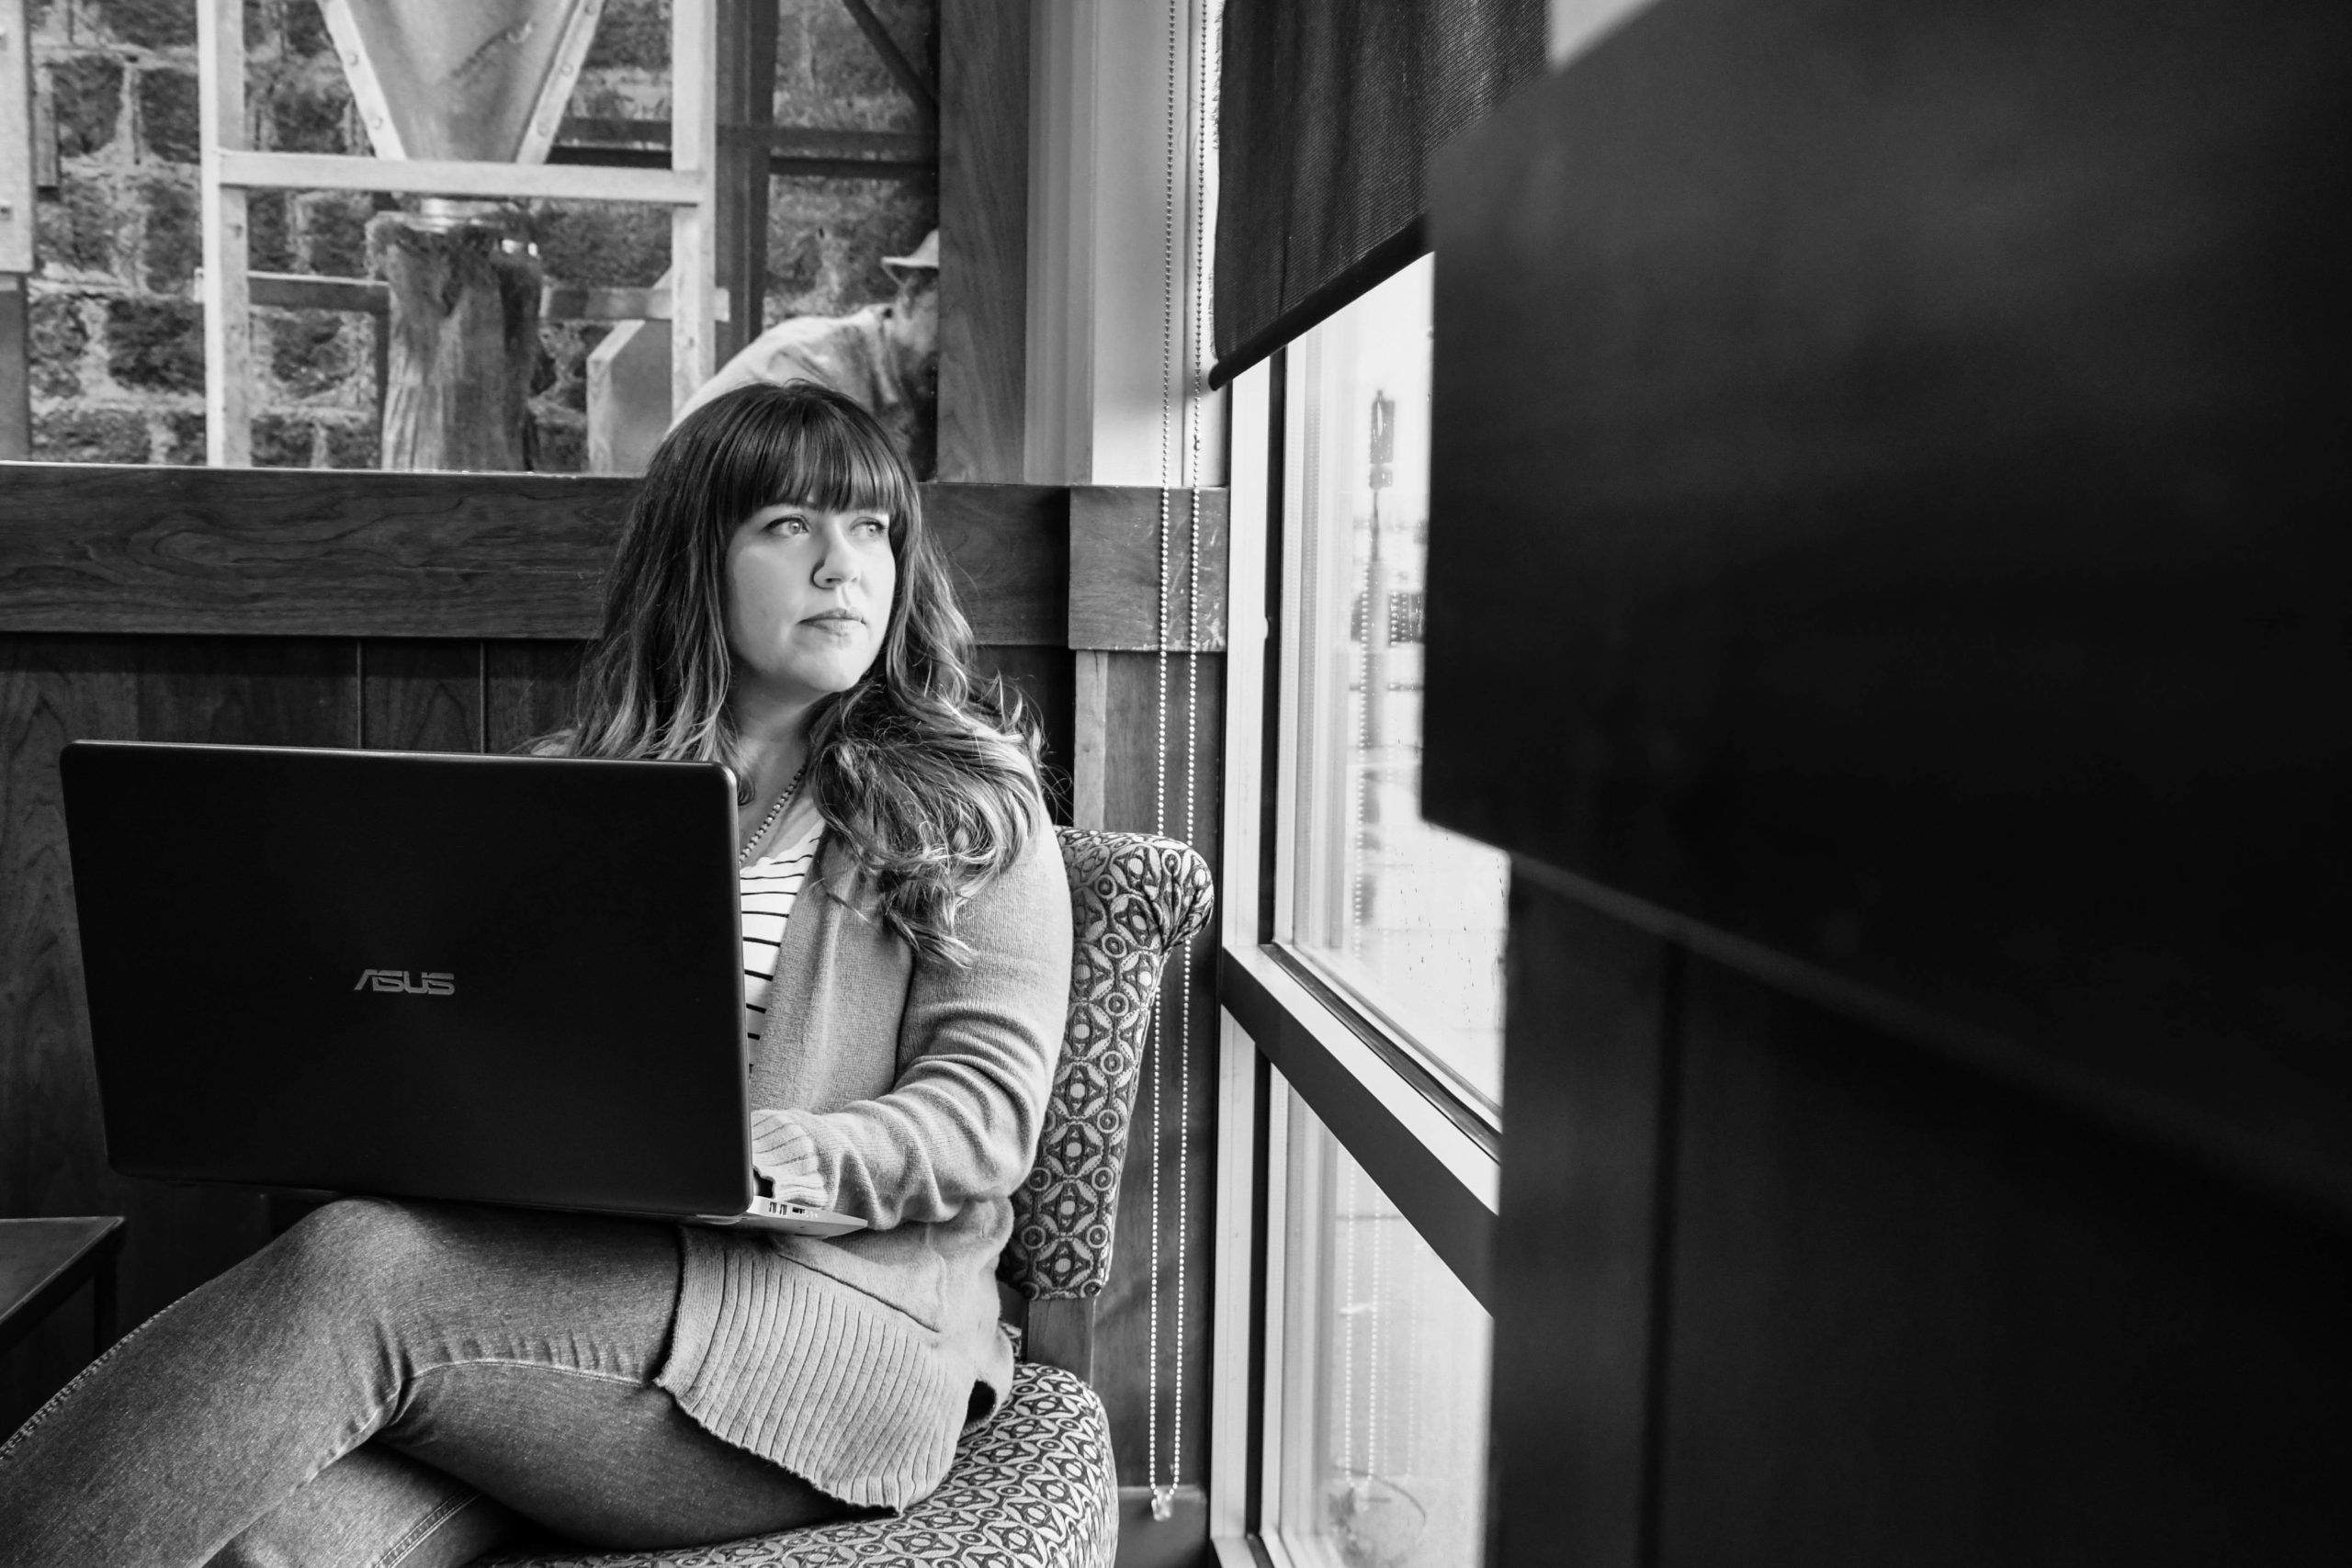 Portrait photography - a woman works on her laptop